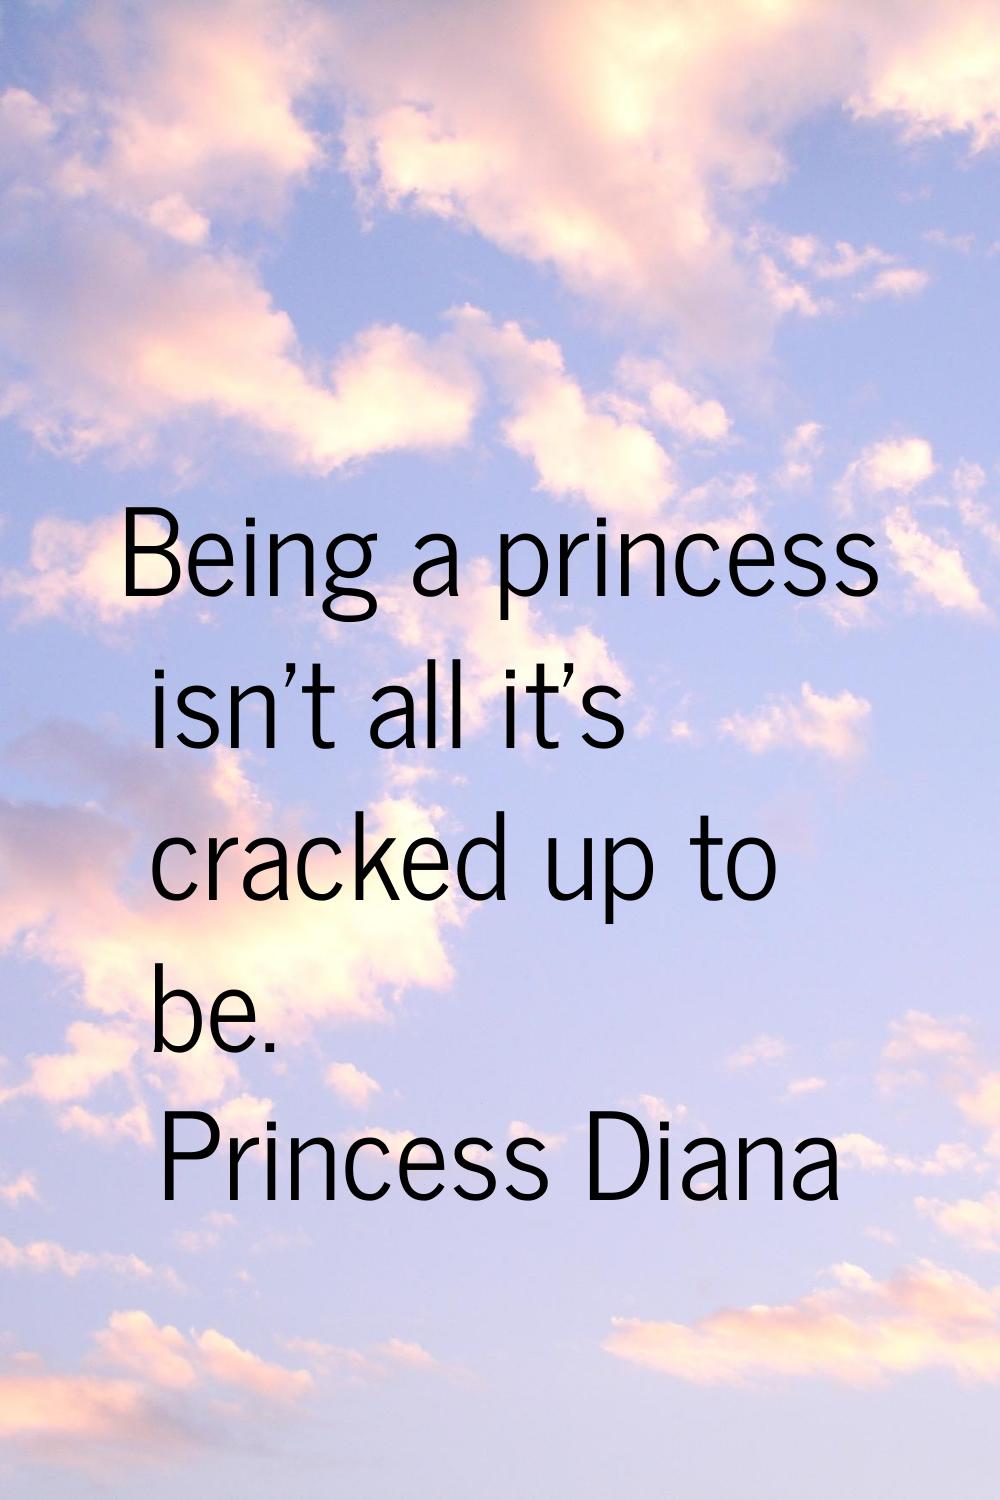 Being a princess isn't all it's cracked up to be.